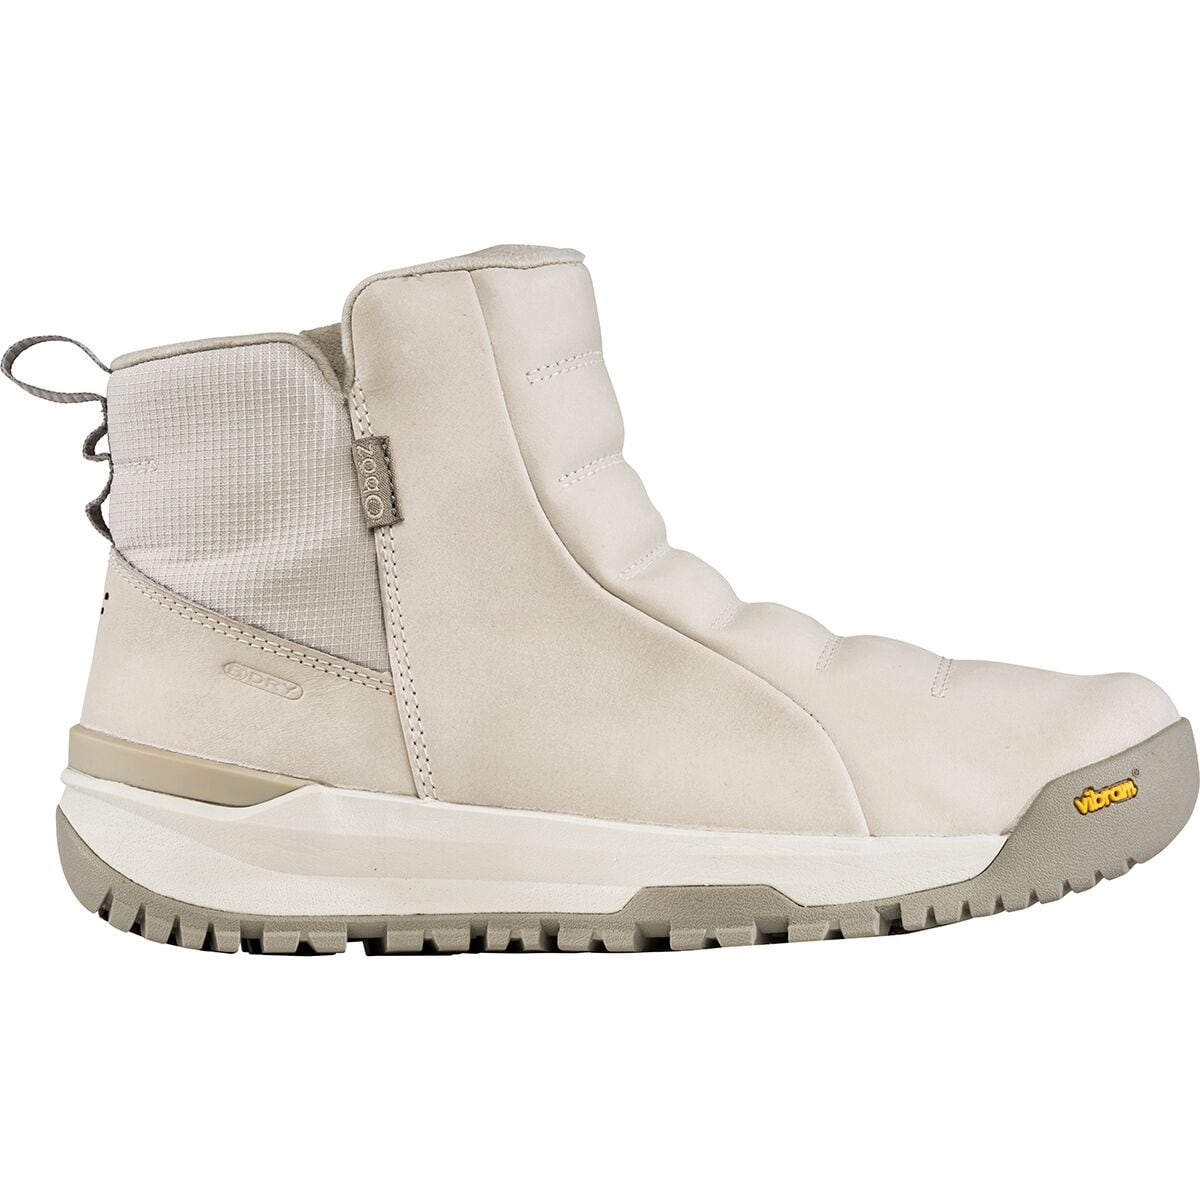 Sphinx Pull-On Insulated B-DRY Boot - Women